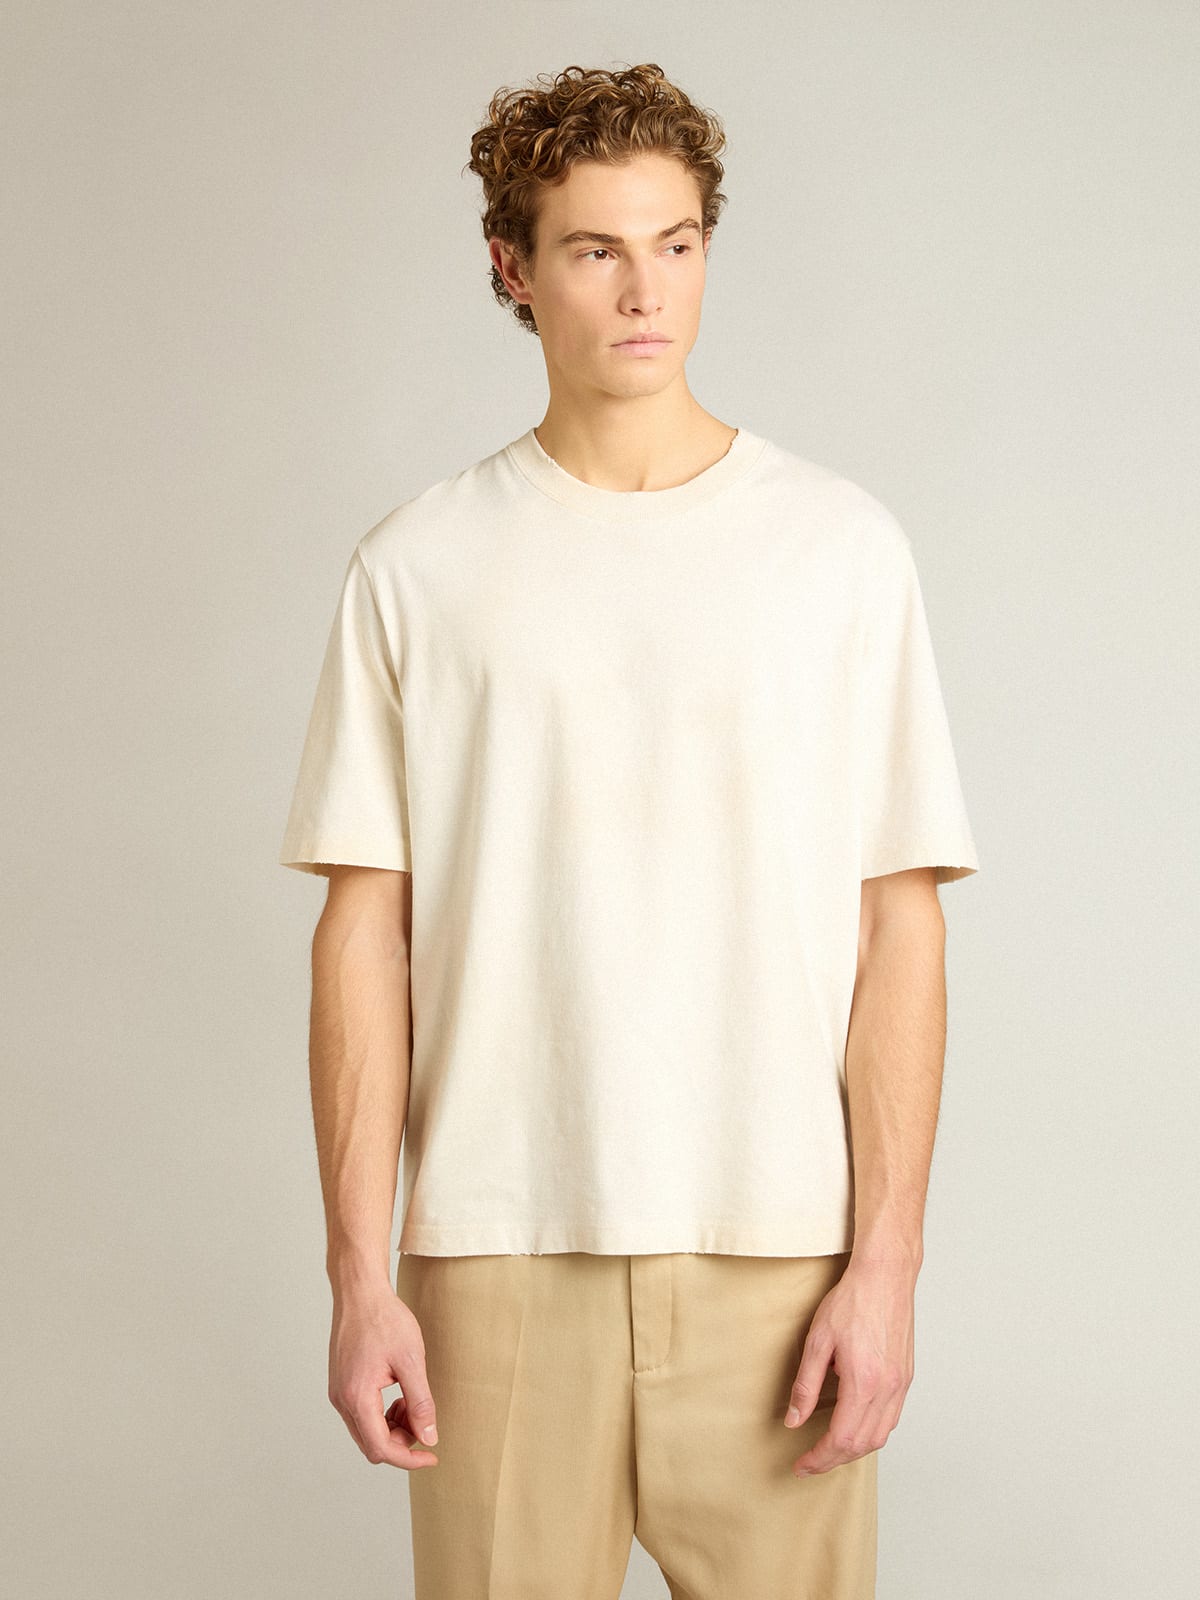 Pale pink men’s T-shirt with lettering in the center